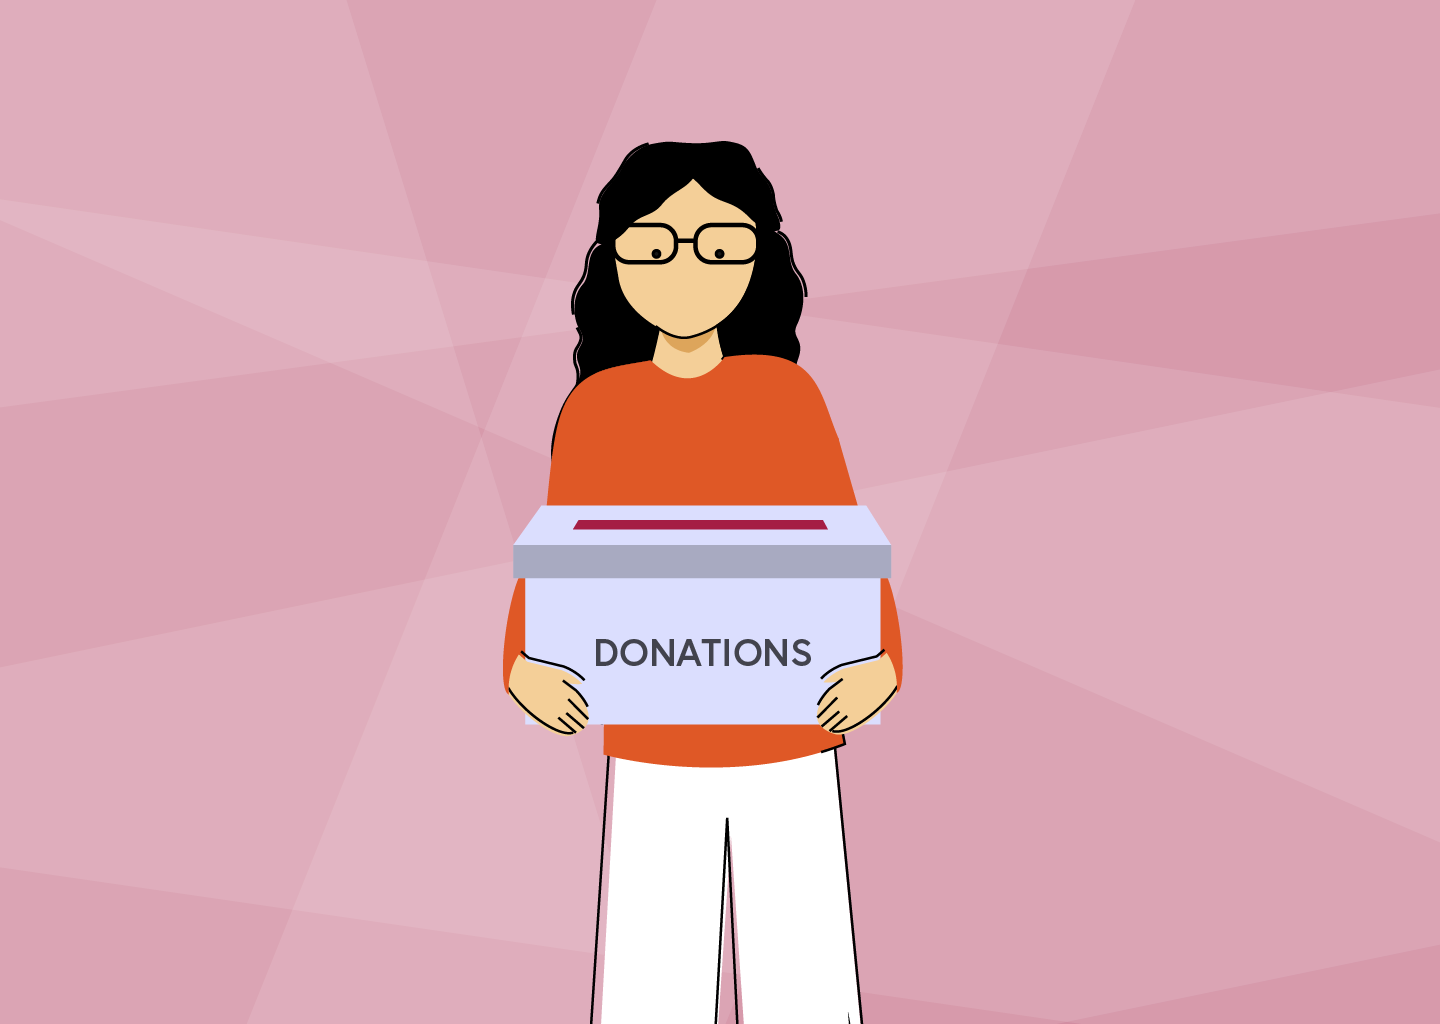 How to Ask for Donations: The Fundraising 411 for Any Nonprofit